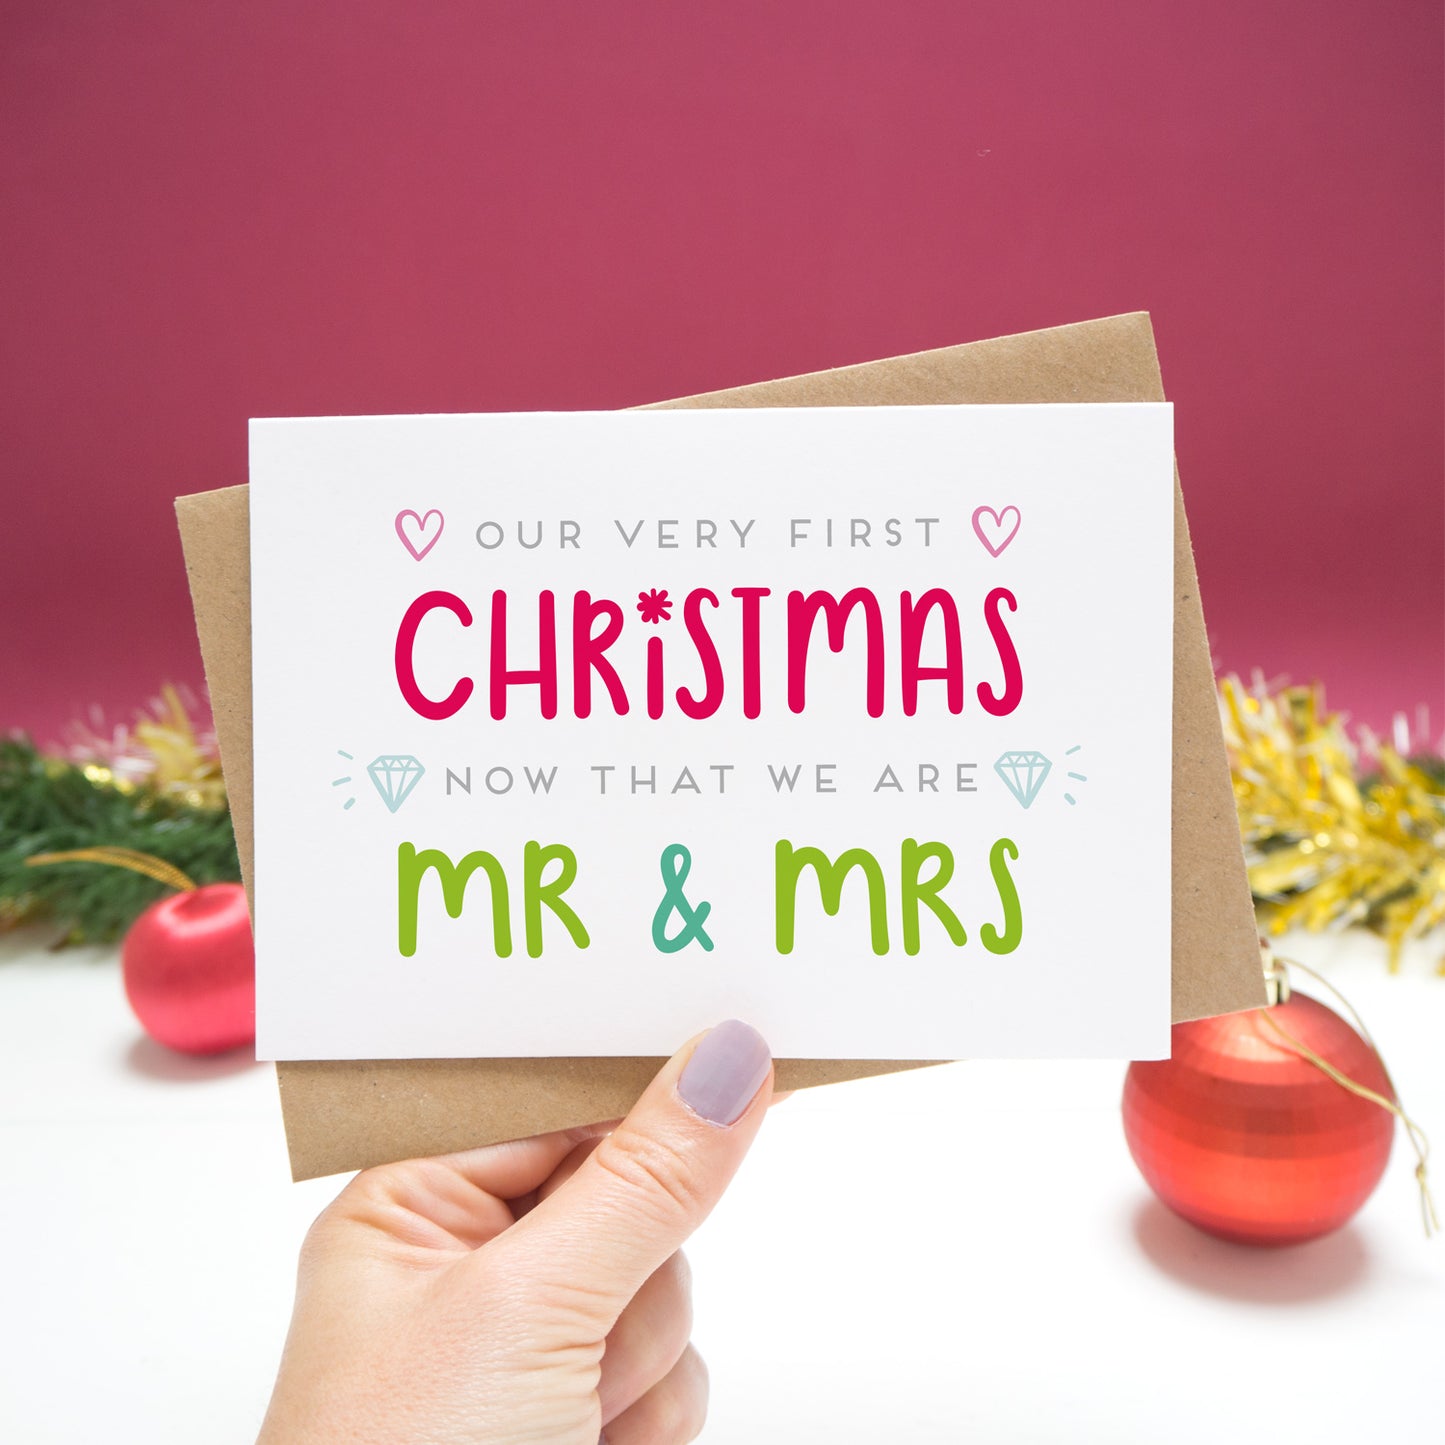 'Our very first Christmas now that we are Mr and Mrs.' Christmas Card held in front of a Christmassy scene with baubles and tinsel.